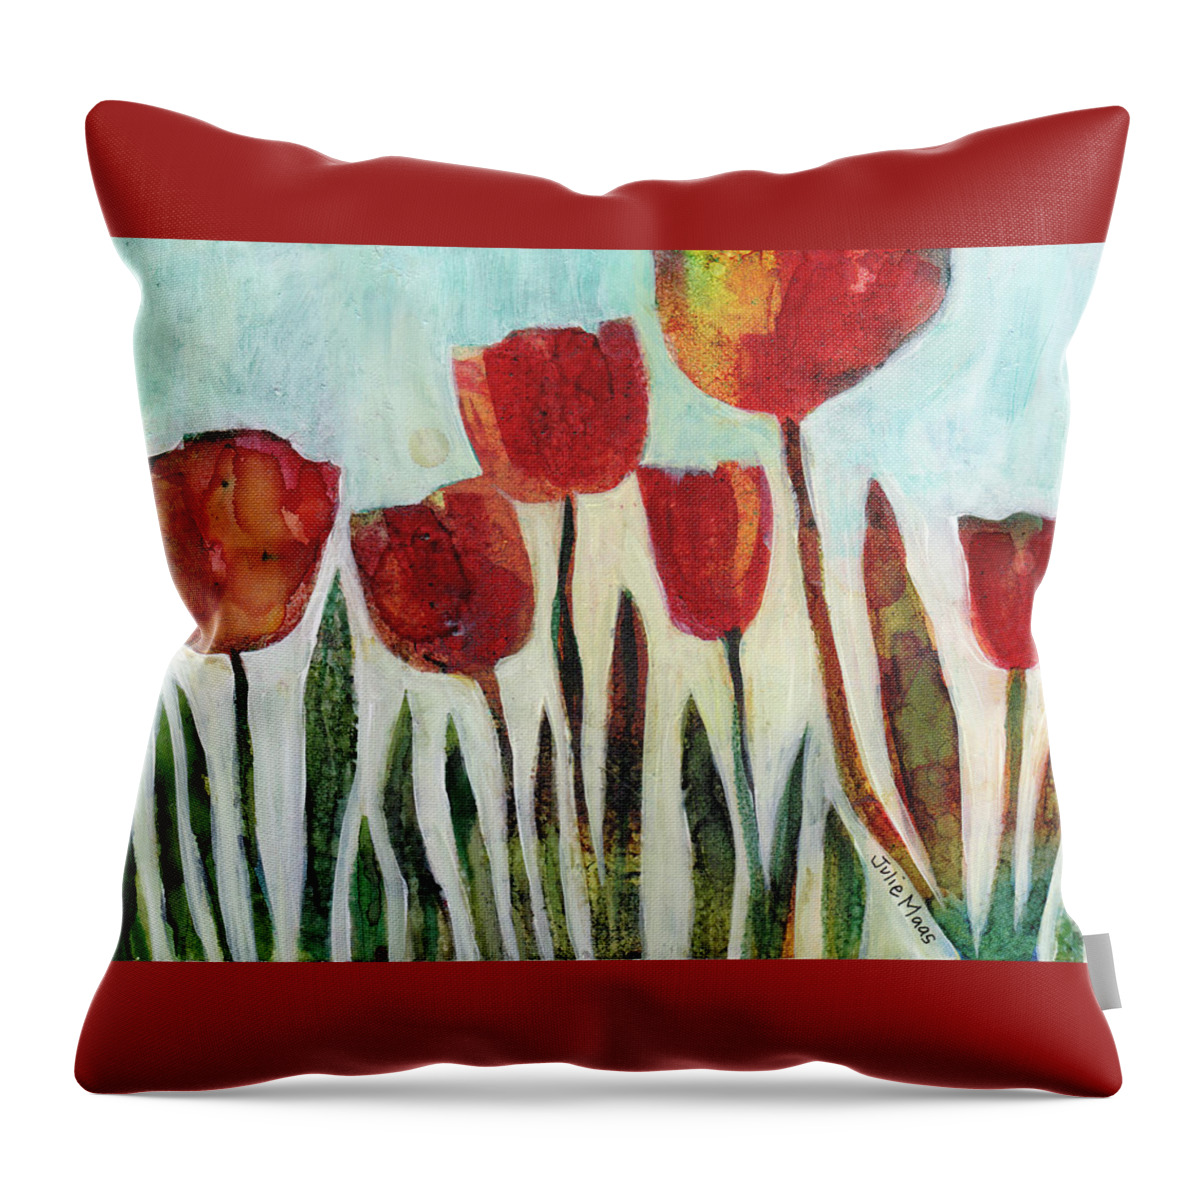 Red Tulips Throw Pillow featuring the painting Red Tulips by Julie Maas